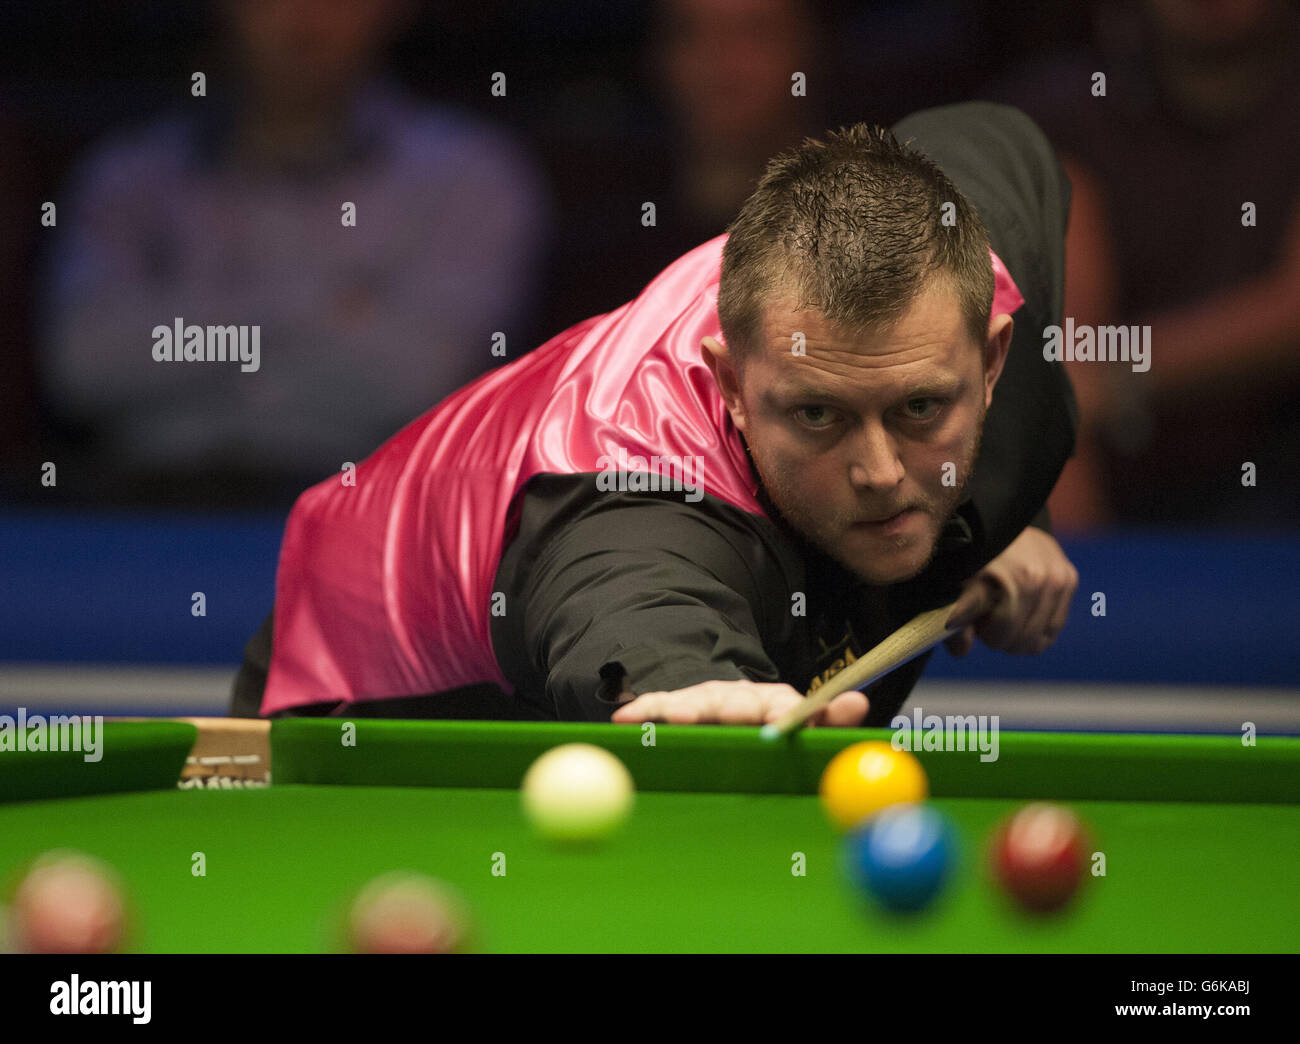 Mark Allen in action against Judd Trump during day nine of the williamhill.com UK Championships at The Barbican Centre, York. Stock Photo